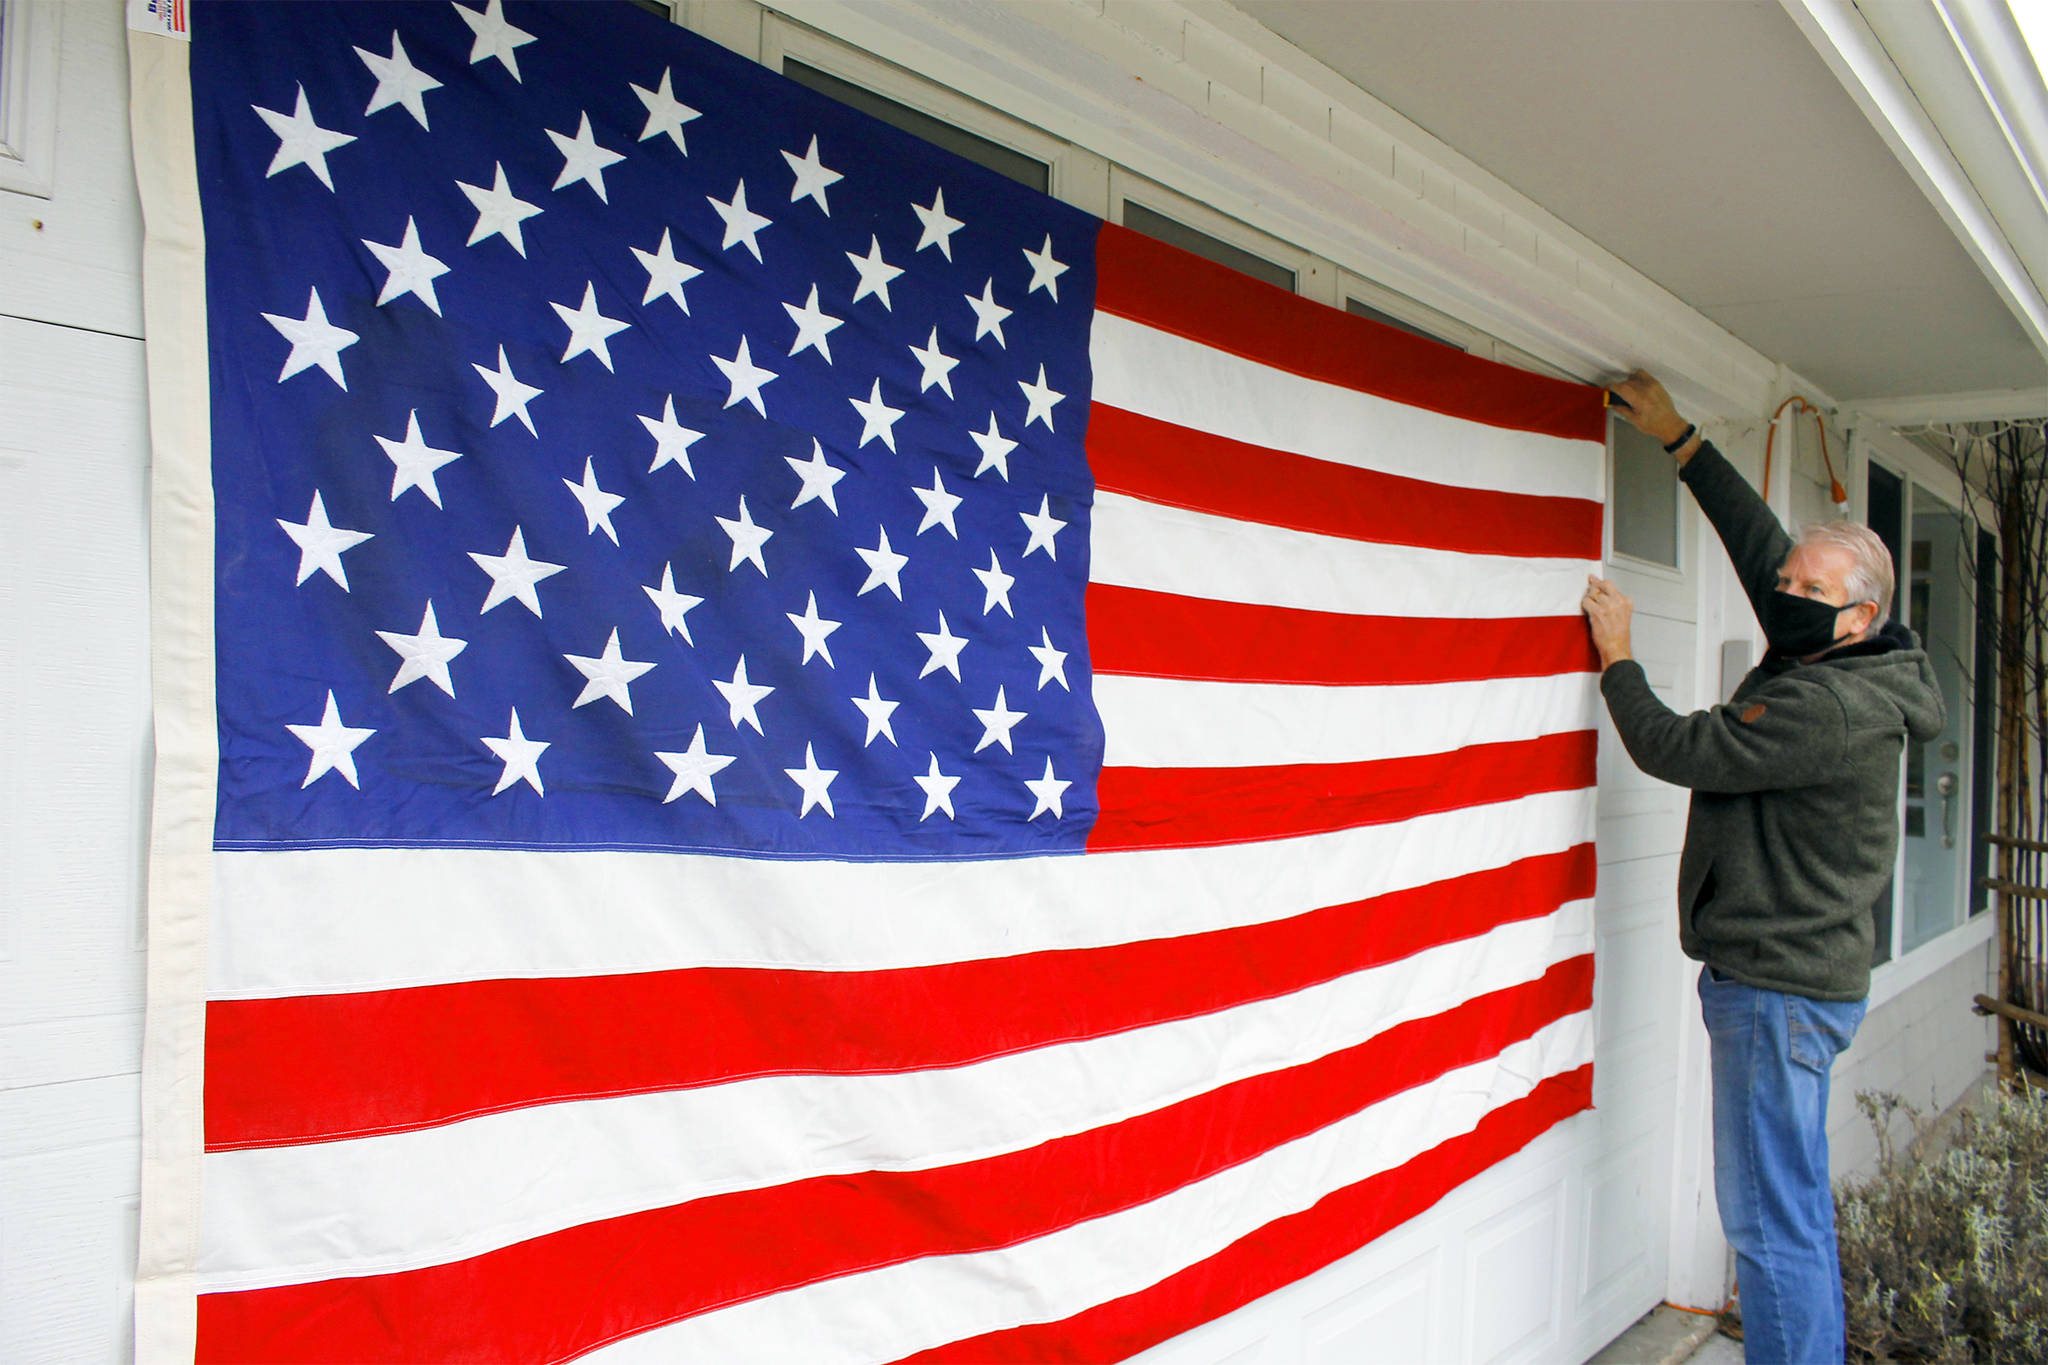 South Whidbey resident Doug Hansen displays a large American flag Wednesday that once flew over the White House during the Jimmy Carter Administration. Photo by Kira Erickson/Whidbey News-Times